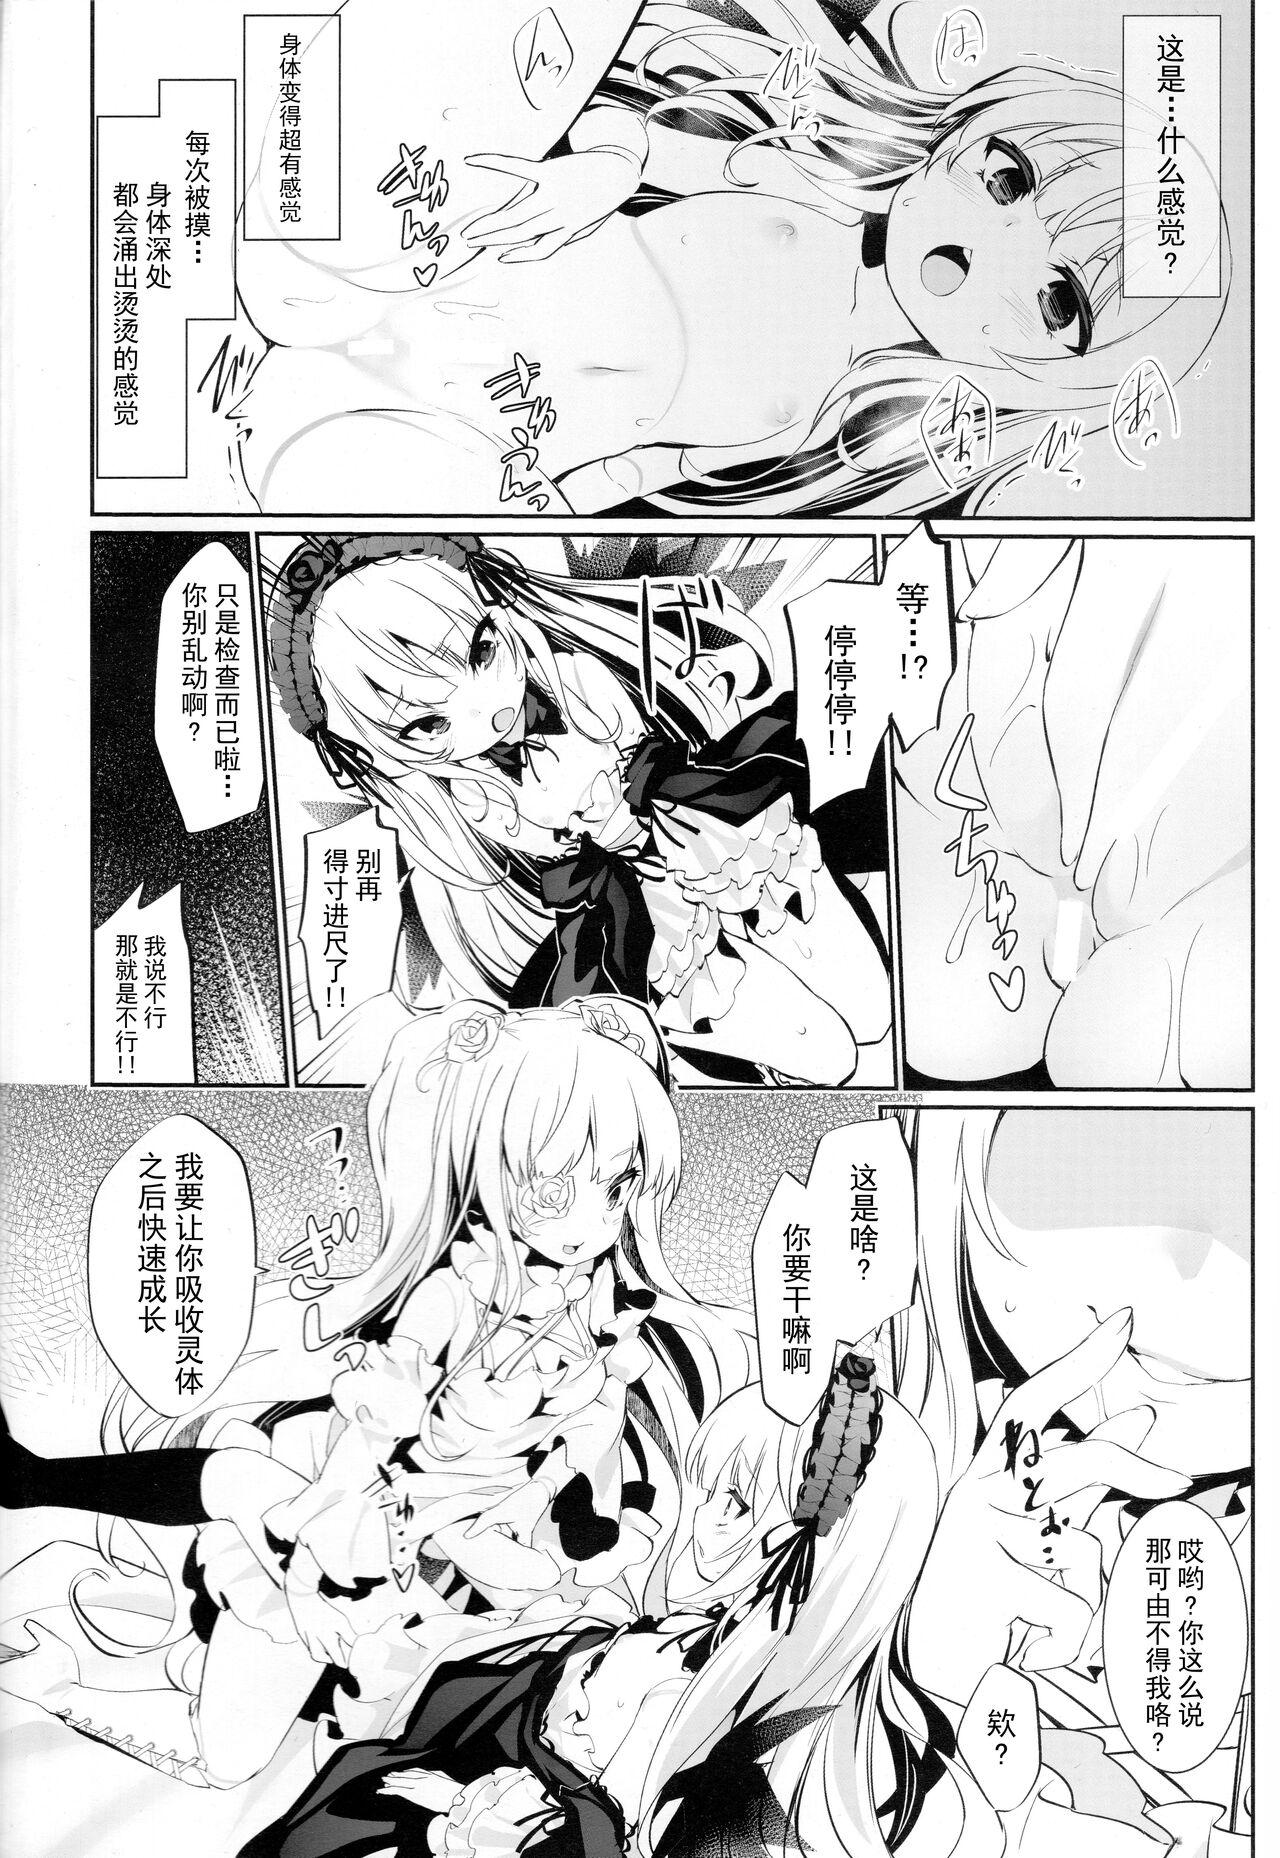 Suckingcock Glamour Growth - Rozen maiden Rabo - Page 5